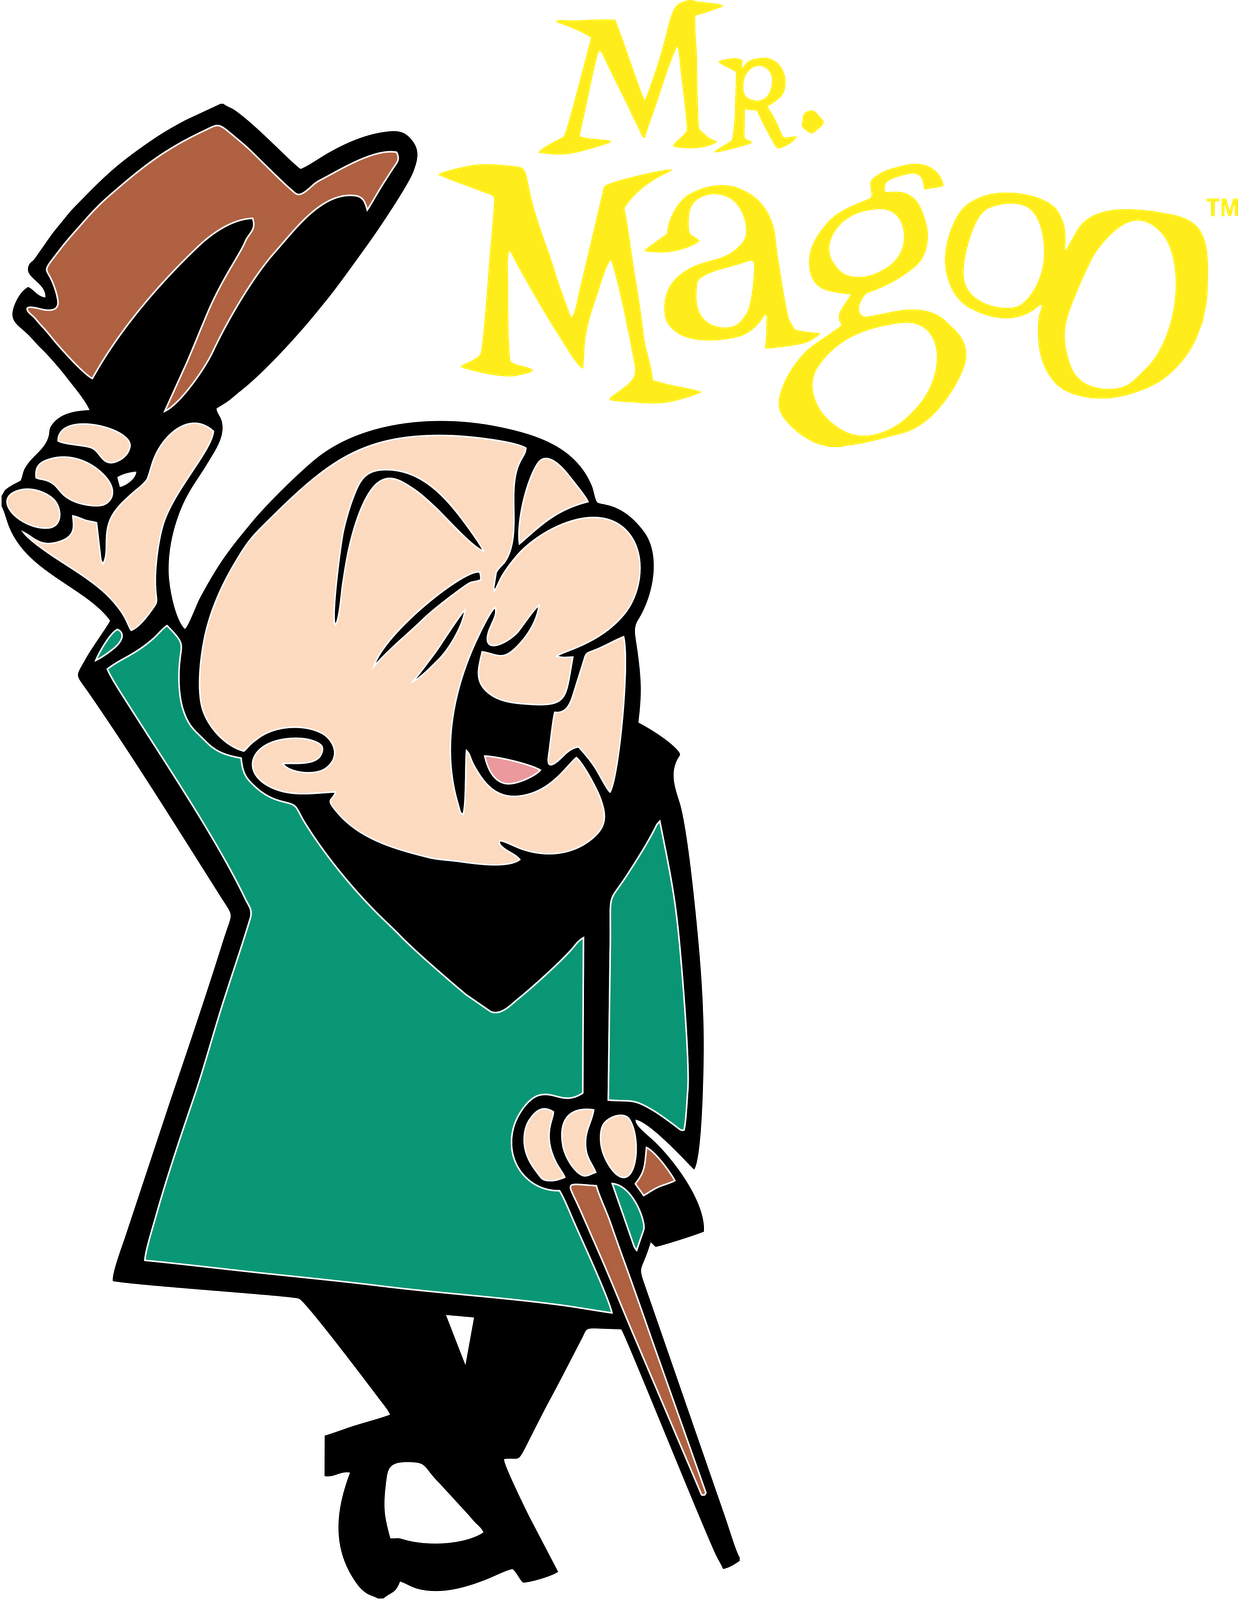 Magoo cartoon pictures and irollie published september.